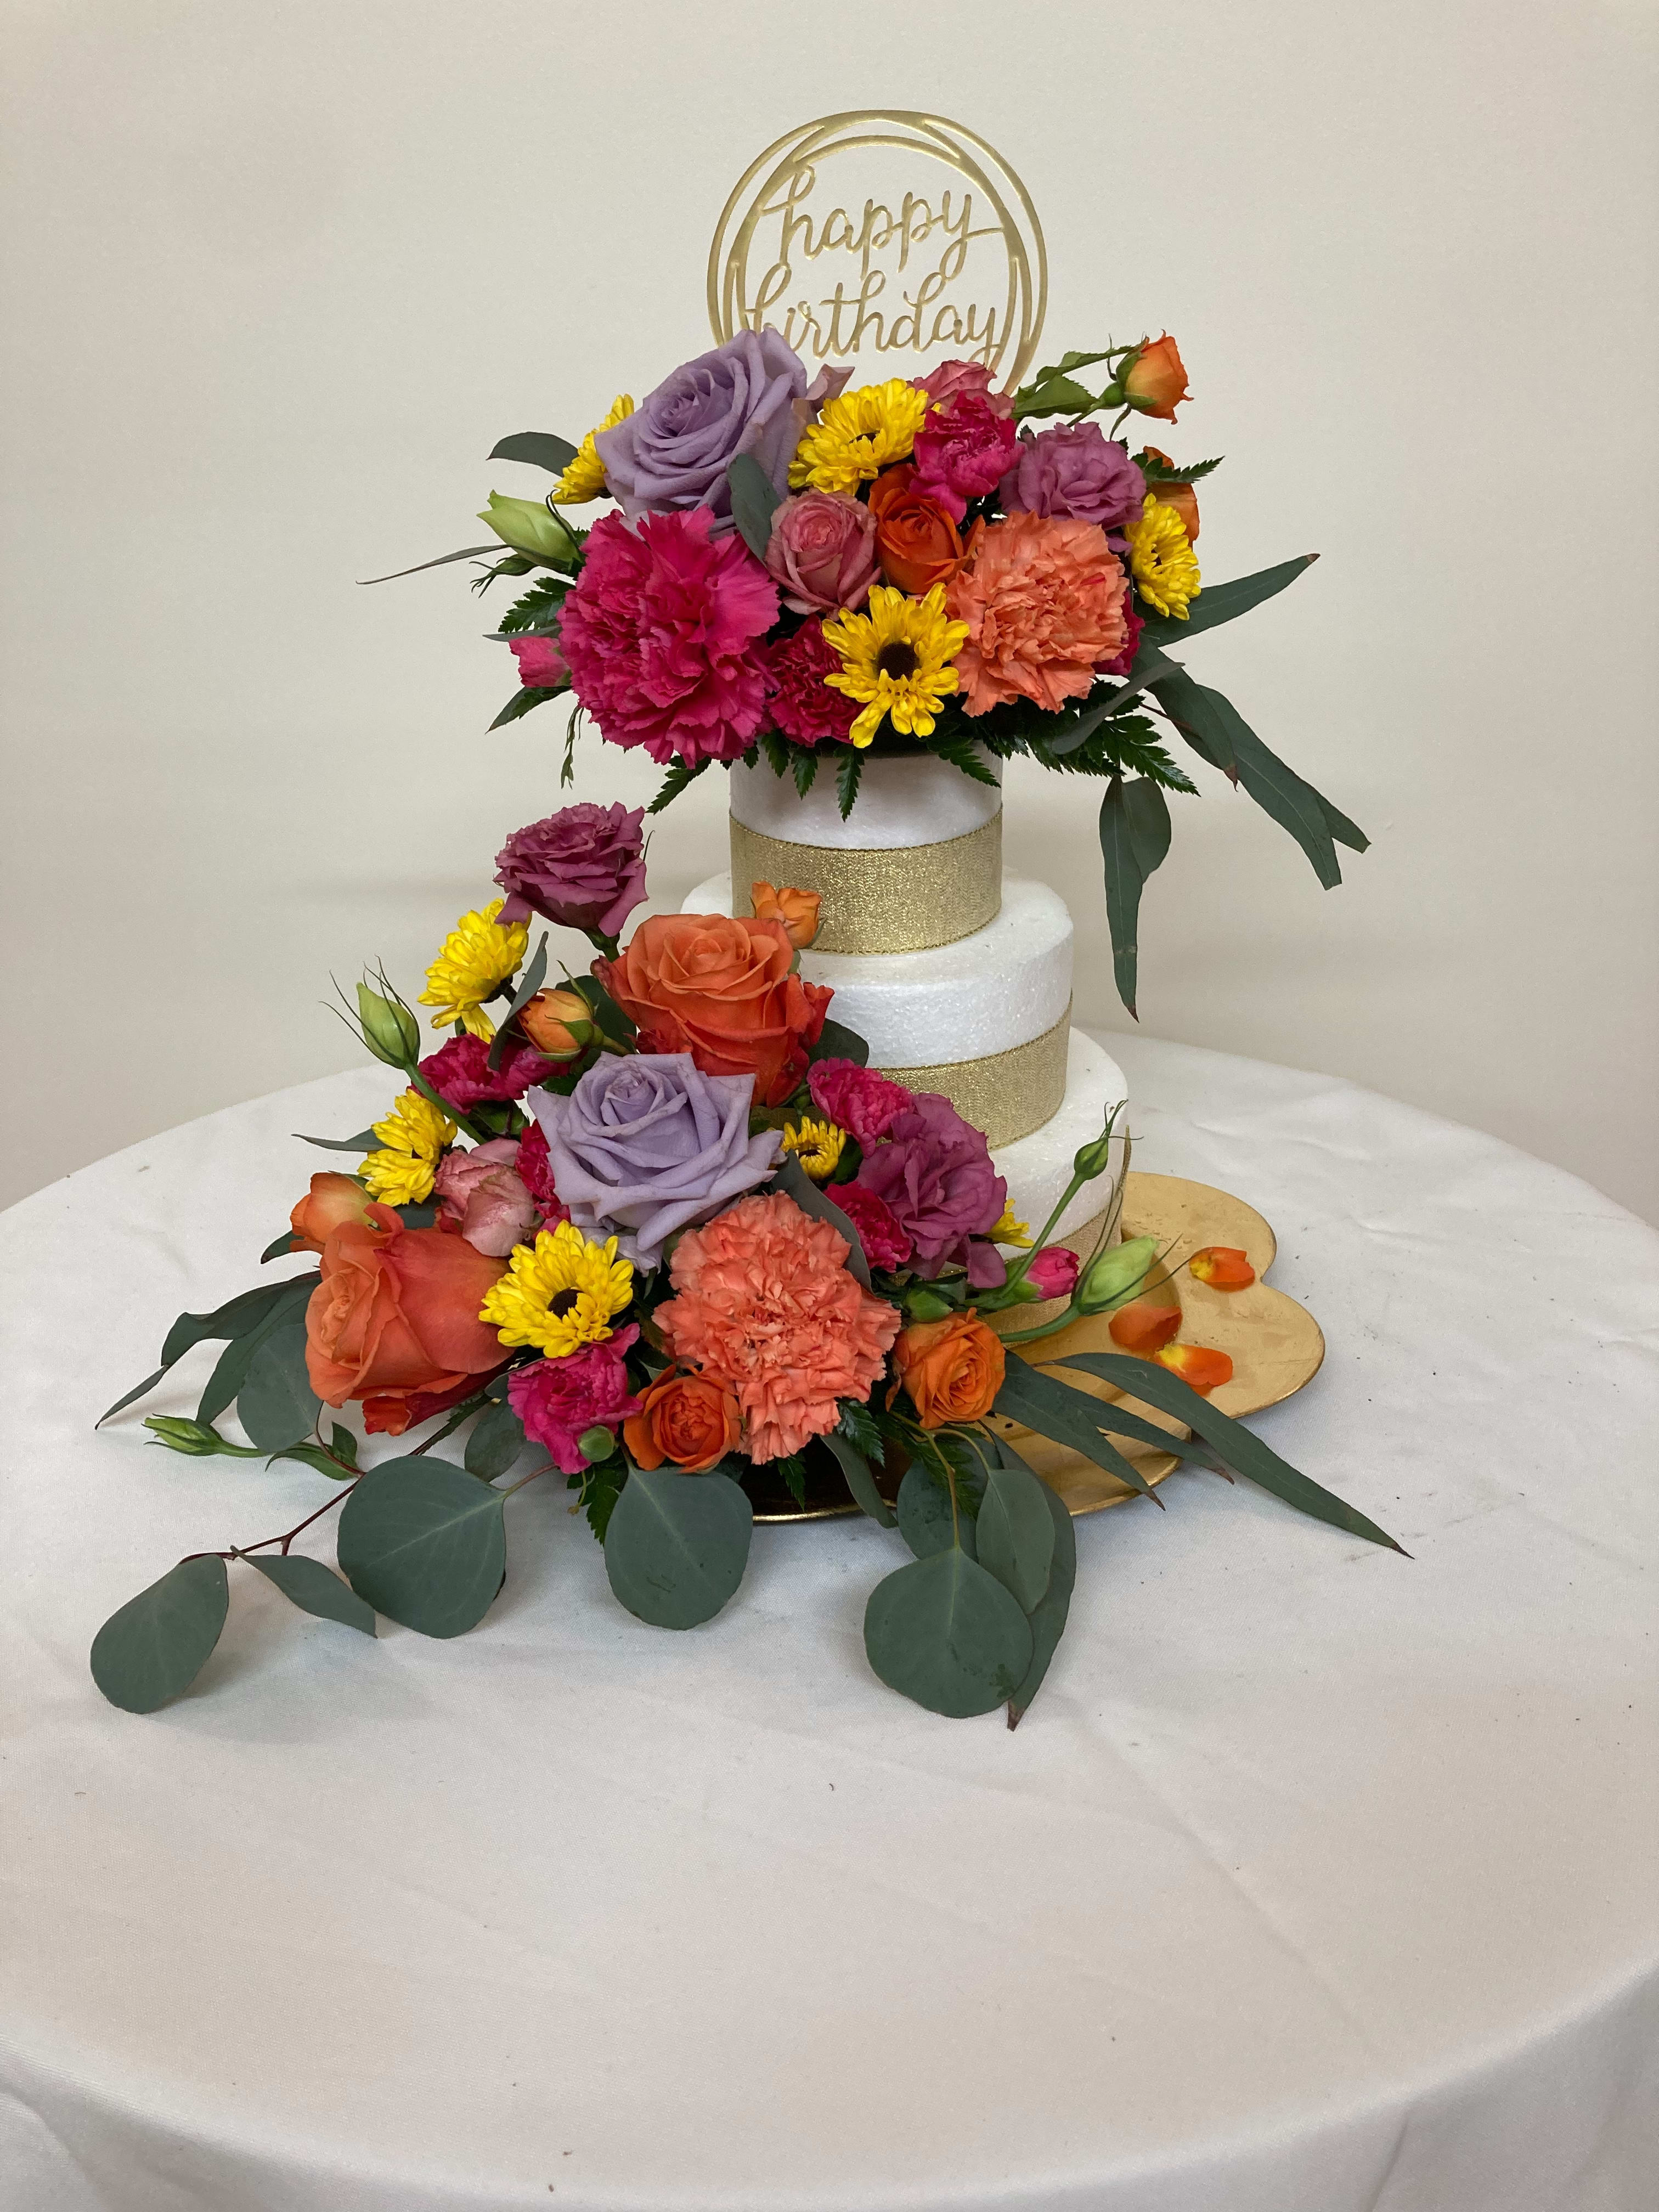 Birthday Tiered Cake - For that very special birthday, choose a tiered cake with your choice of flower or color.